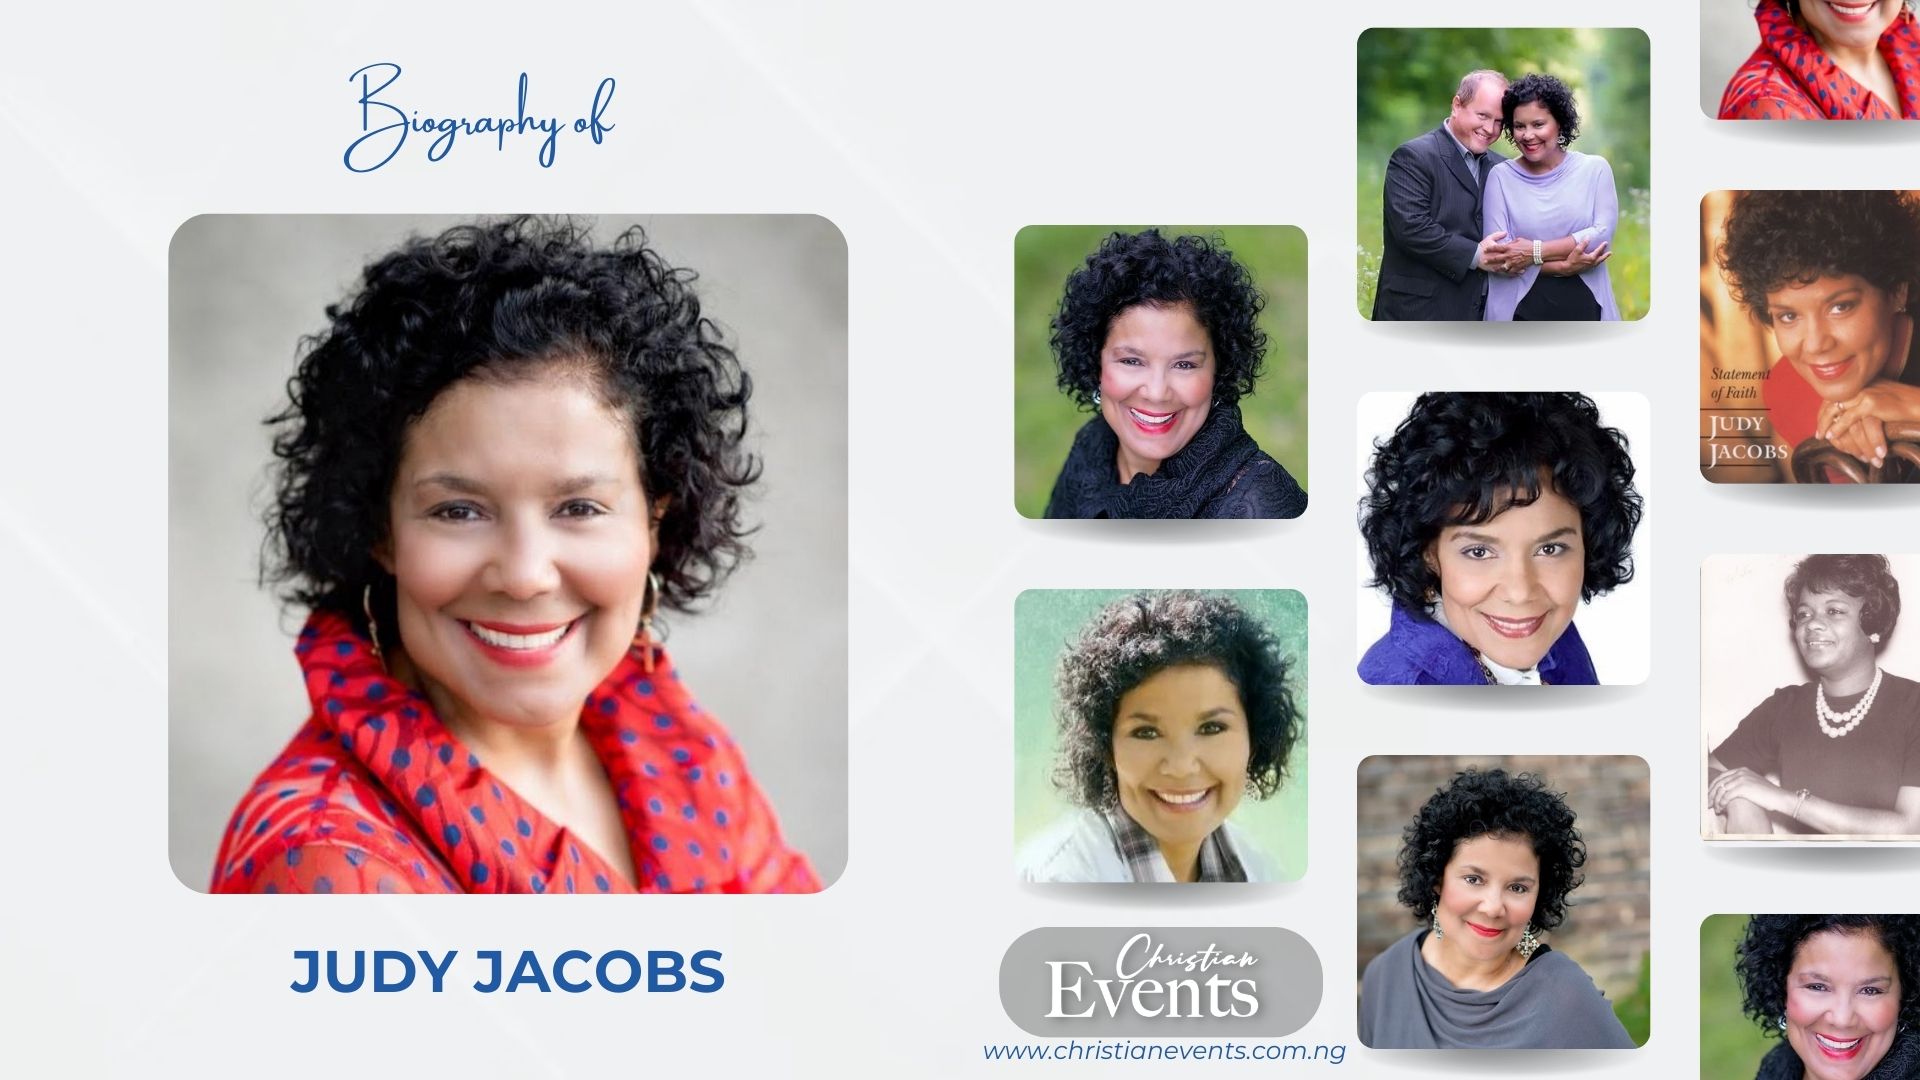 Biography of Judy Jacobs